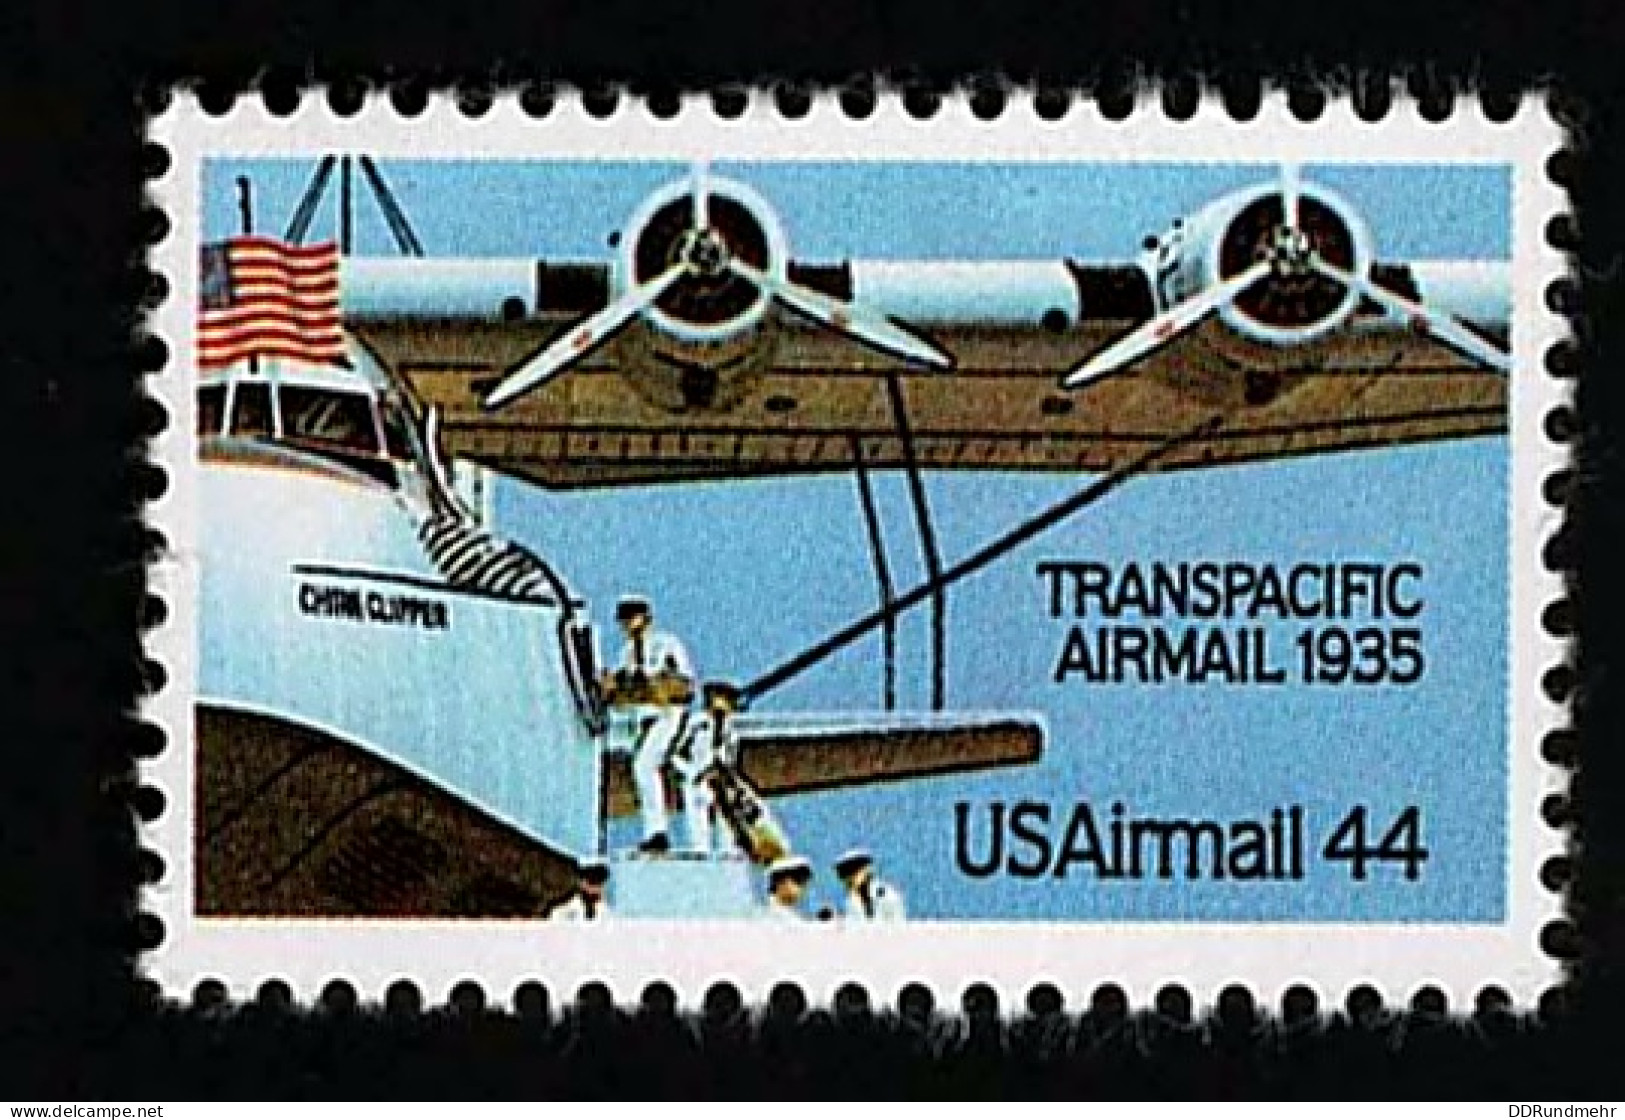 1985 China Clipper Michel US 1727 Stamp Number US C115 Yvert Et Tellier US PA109 Stanley Gibbons US A2144 Xx MNH - 3b. 1961-... Ongebruikt